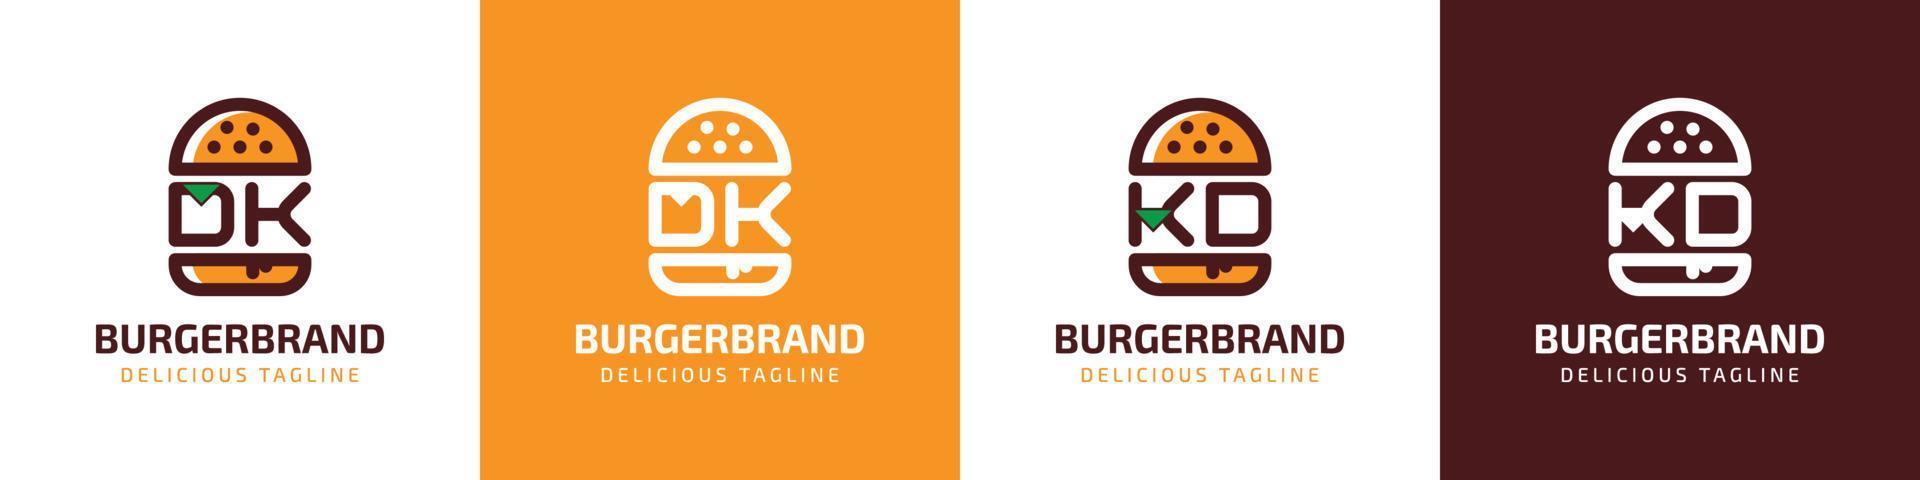 Letter DK and KD Burger Logo, suitable for any business related to burger with DK or KD initials. vector